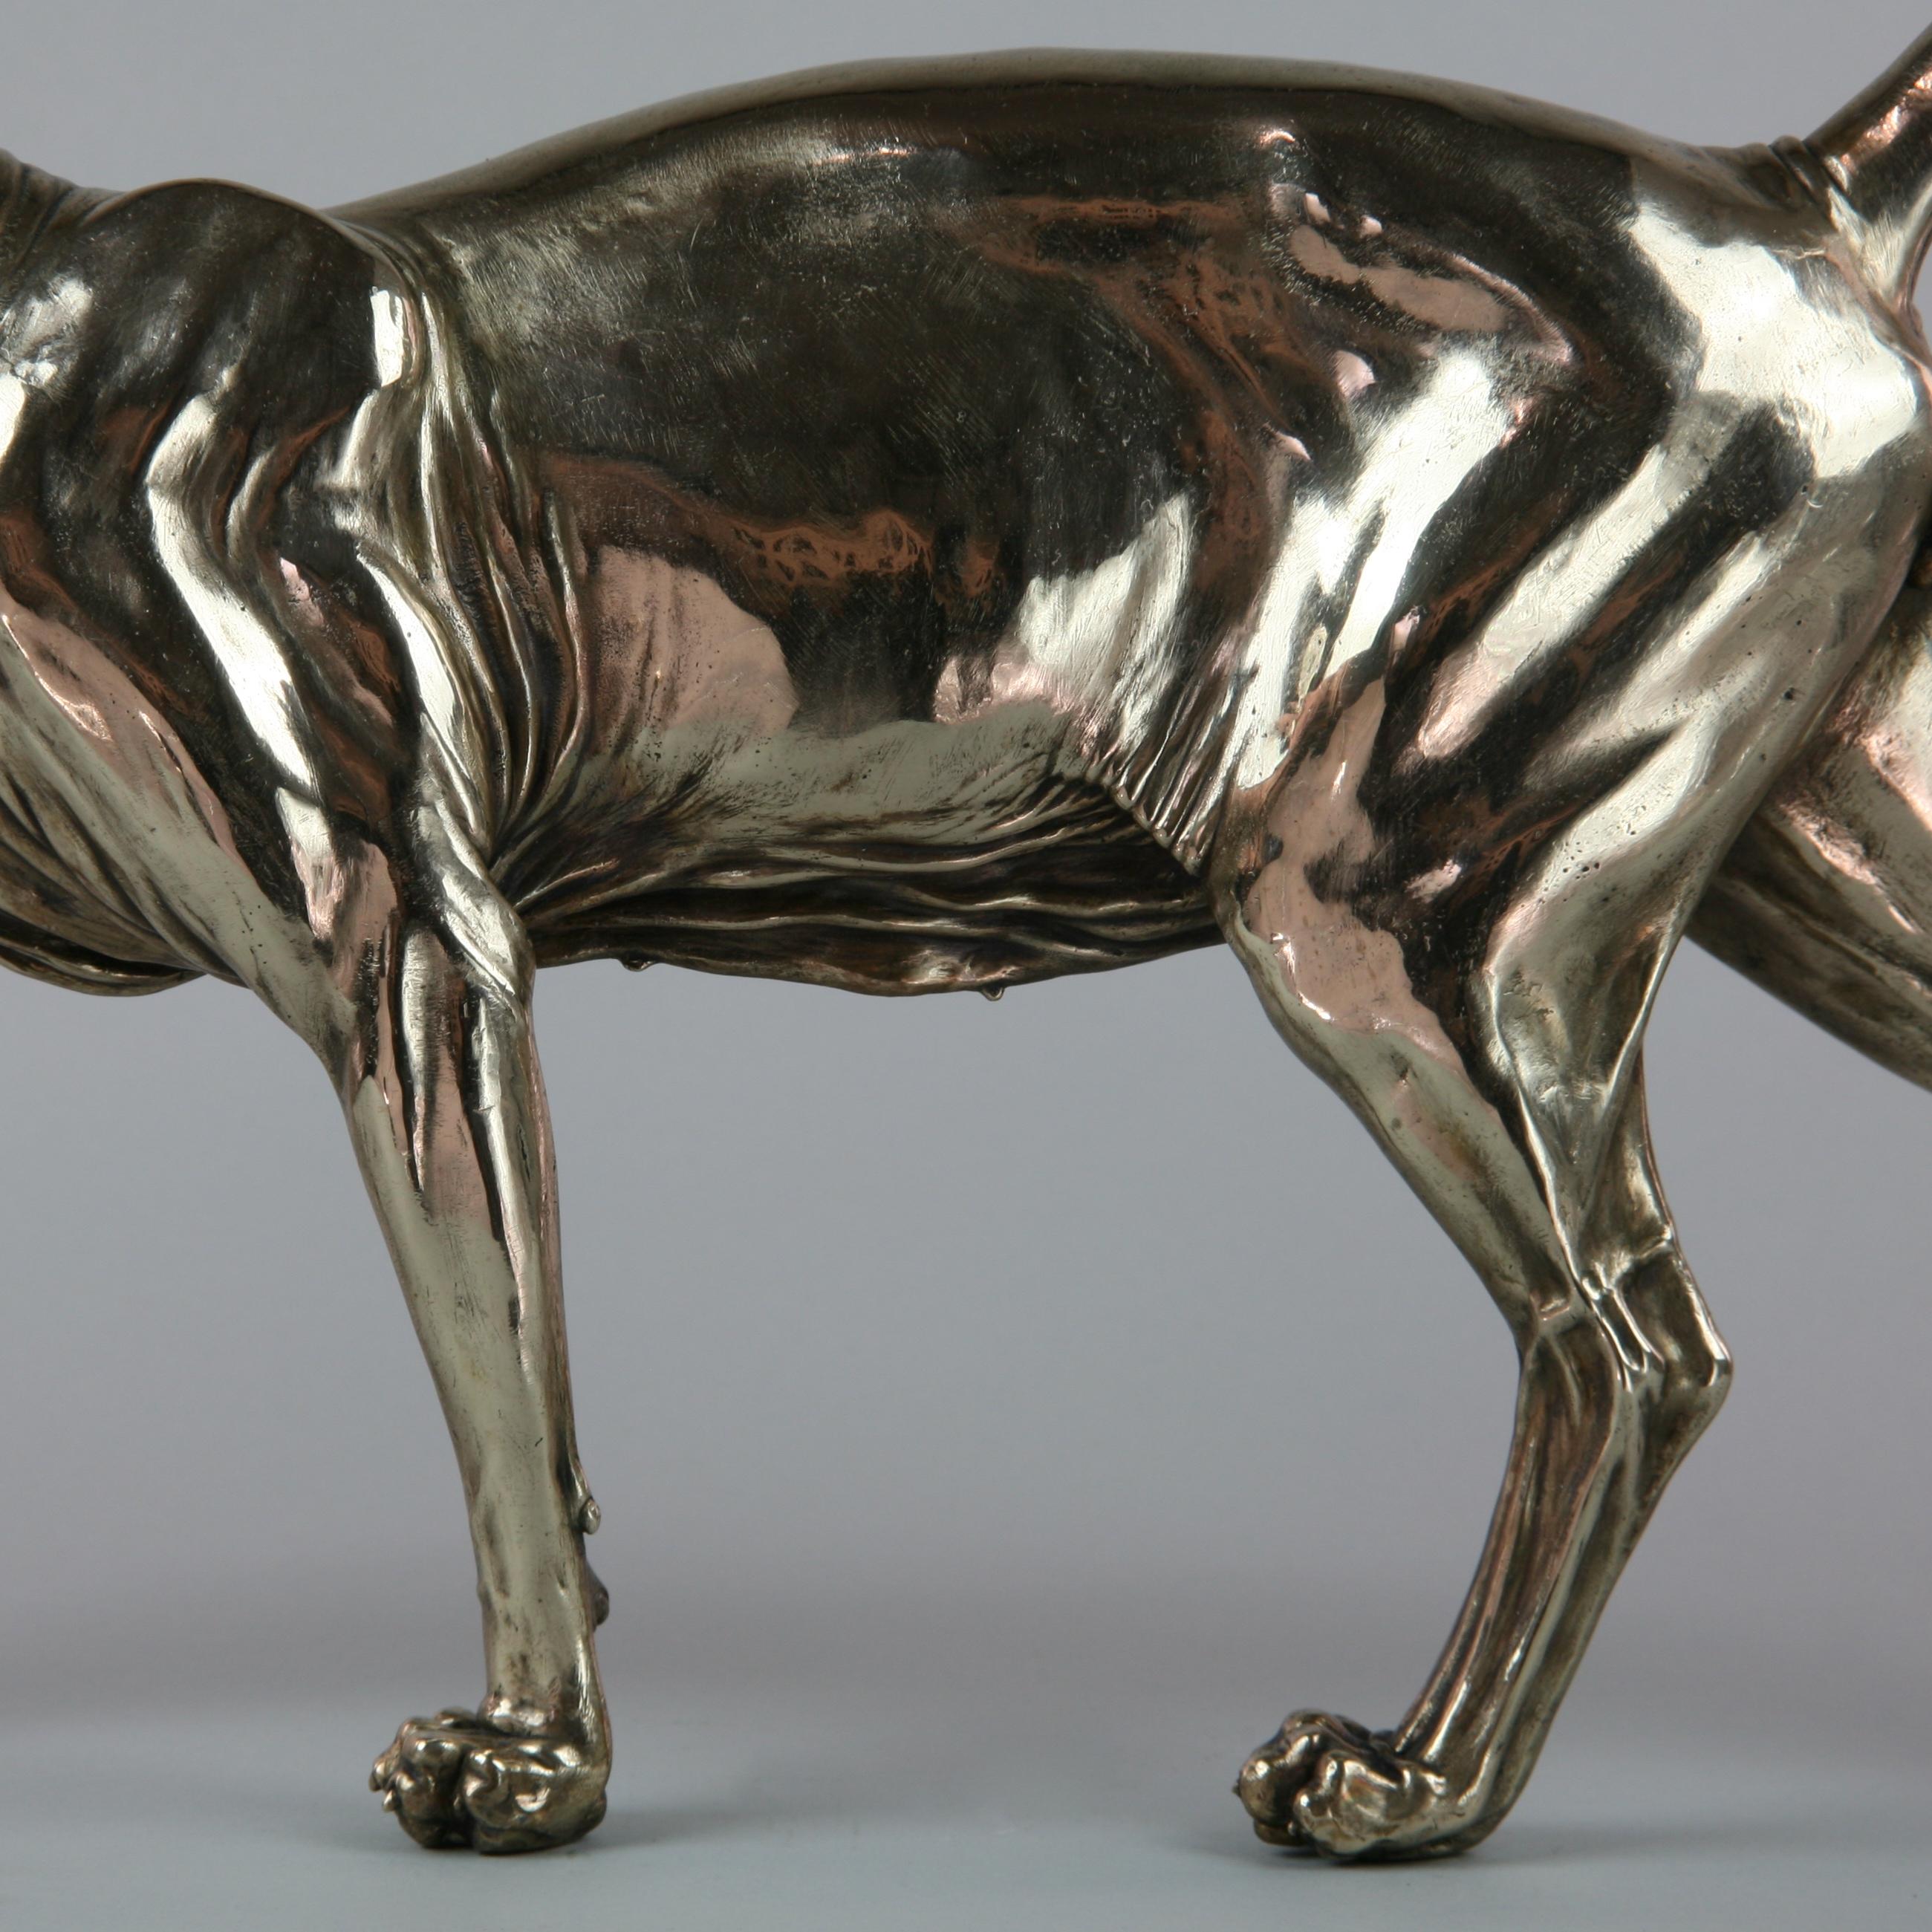 This original bronze sculpture by Andrzej Szymczyk depicts a gorgeous feline personality of a Sphynx Cat form with a royal demeanour. With refined features and textures, the artist presents the animal subject in a modern structure which assumes an